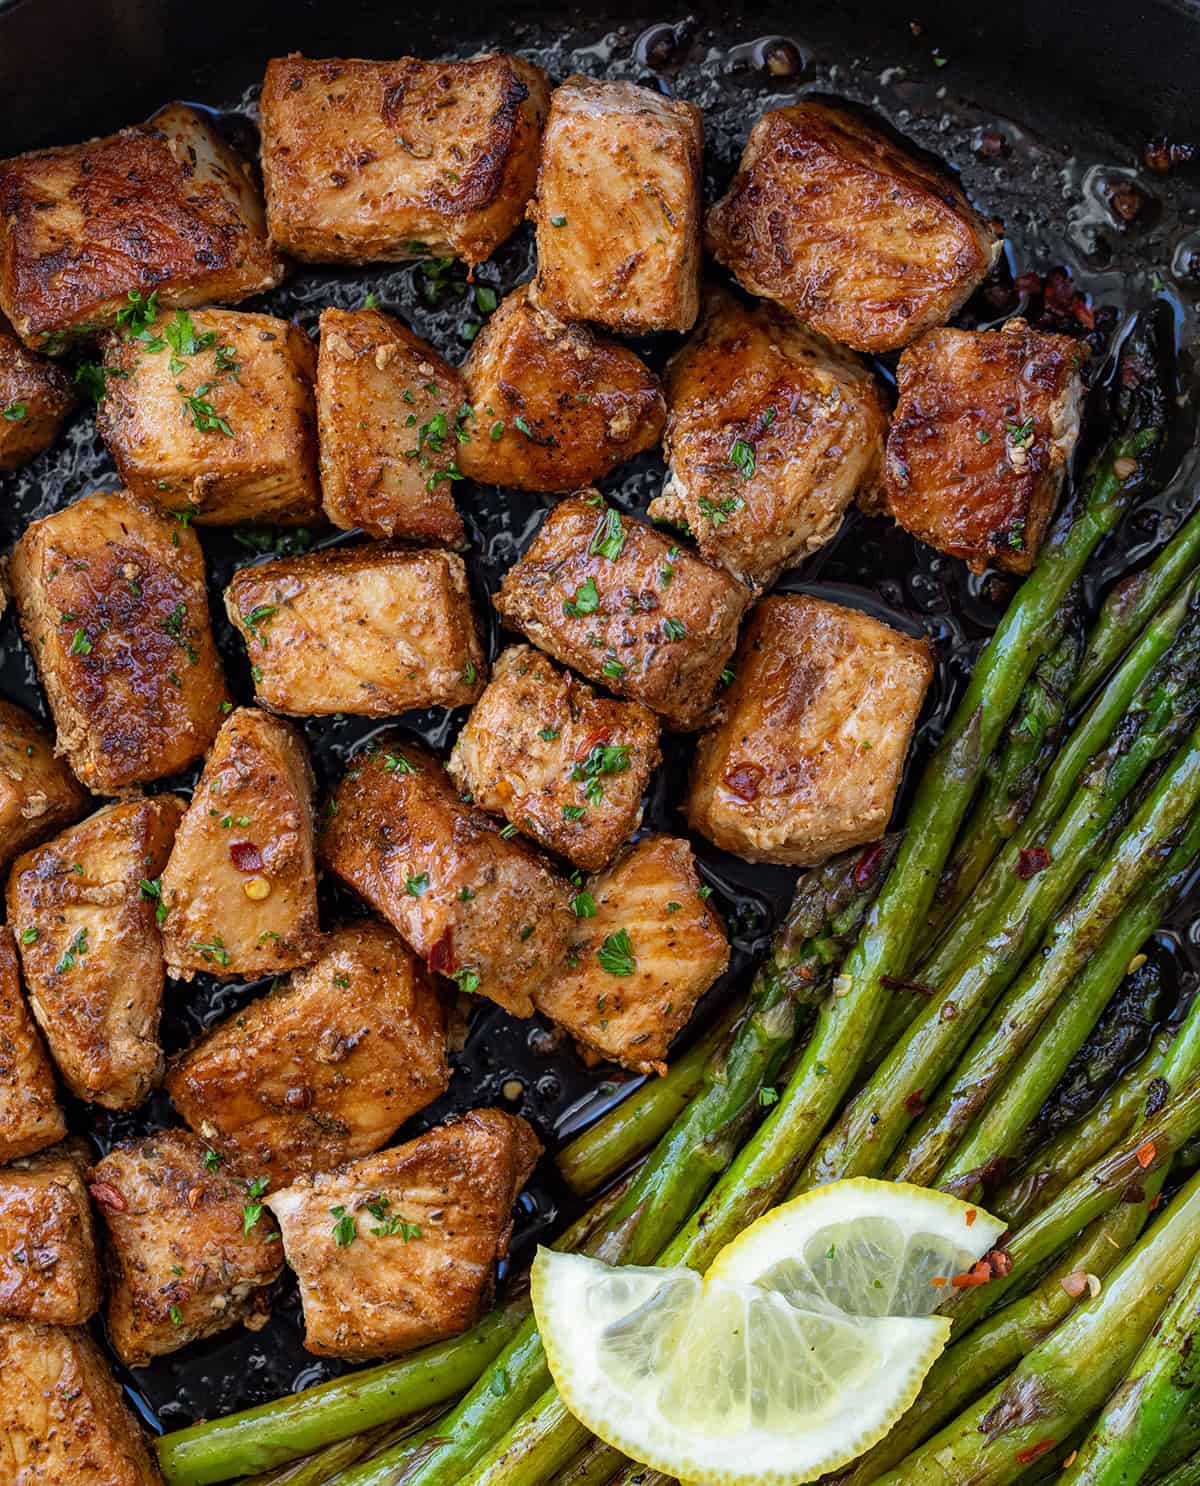 Skillet filled with Blackened Pork Bites and Asparagus on a wooden table from overhead. 